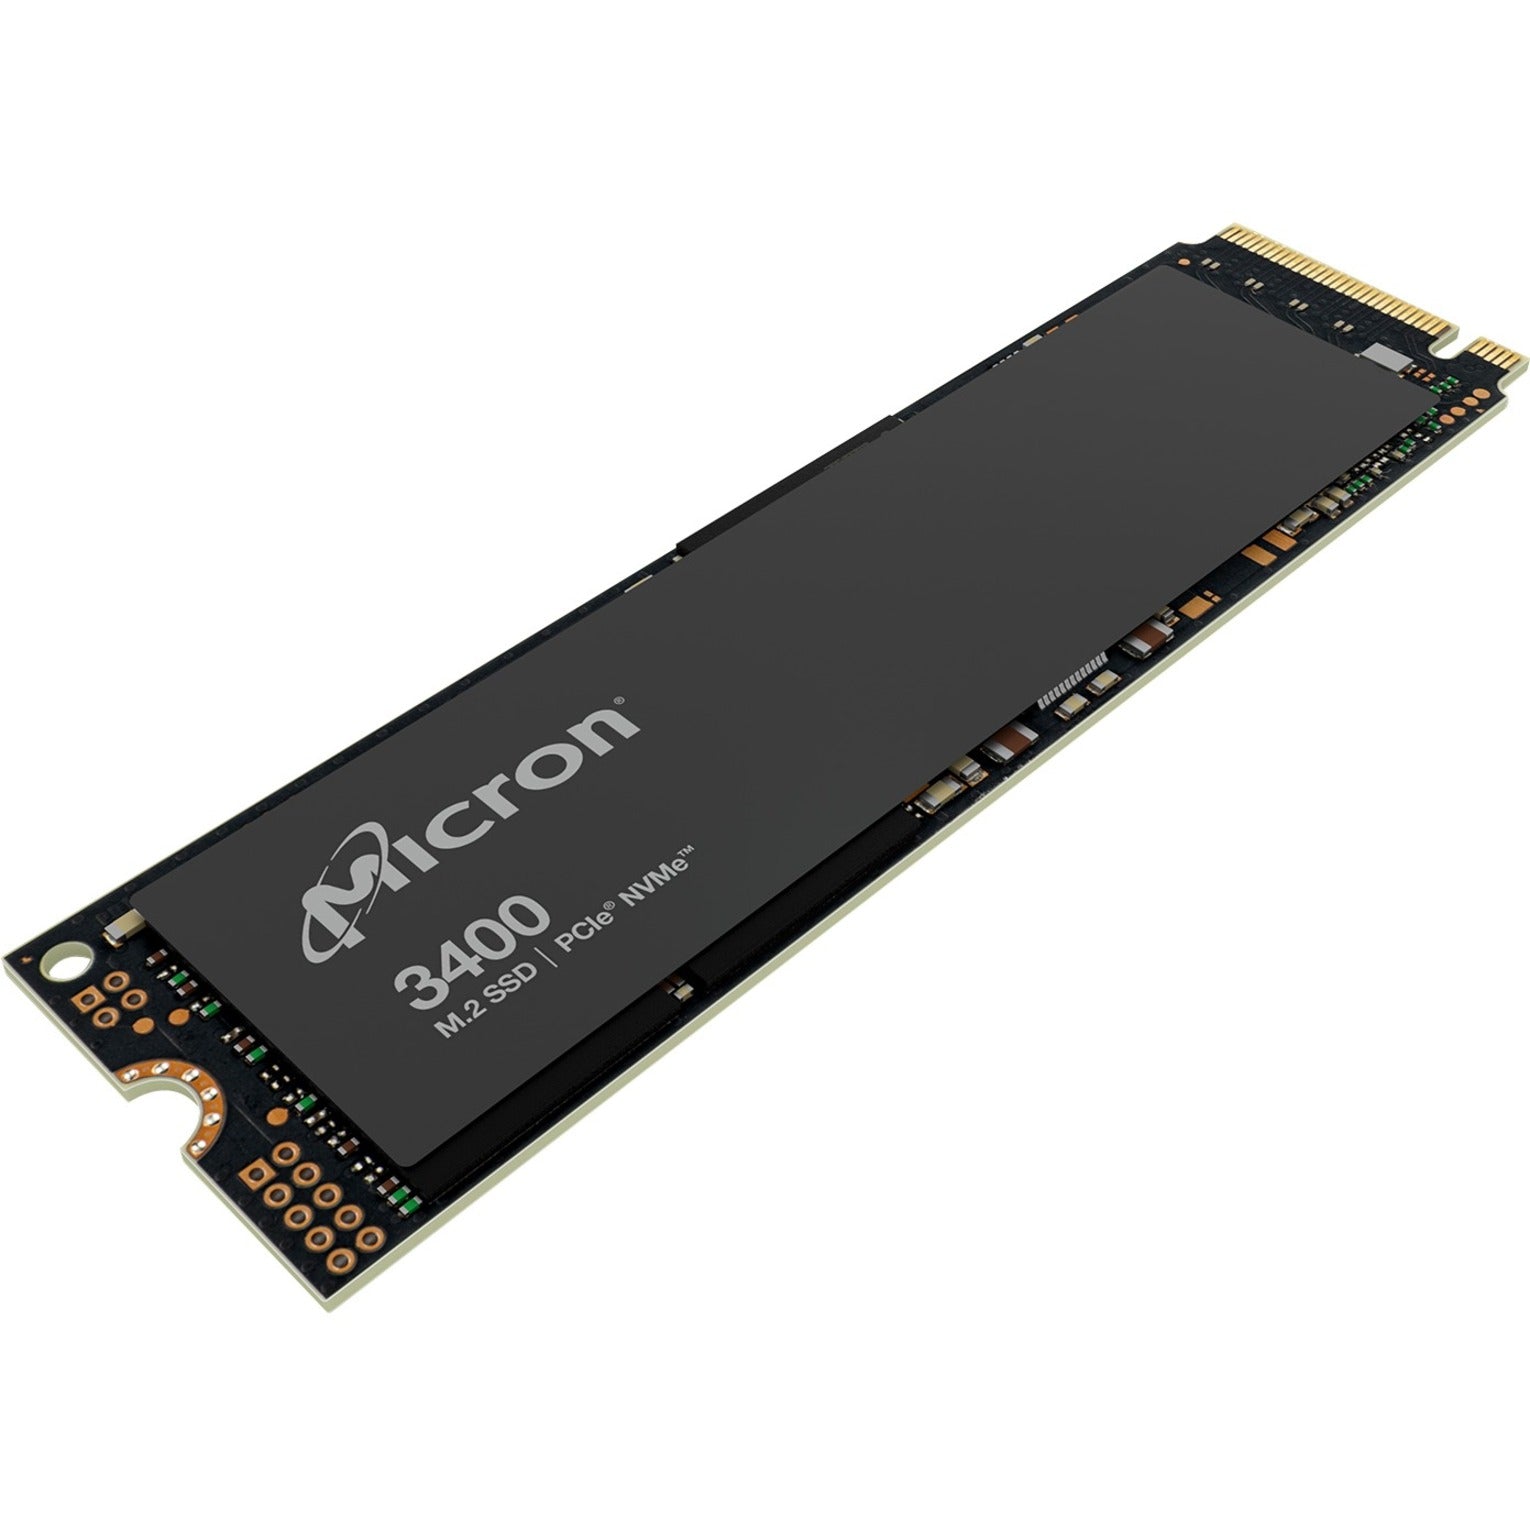 Micron MTFDKBA512TFH-1BC1AABYYR 3400 SSD With NVMe, 512GB, PCIe NVMe 4.0, 6600 MB/s, 3600 MB/s